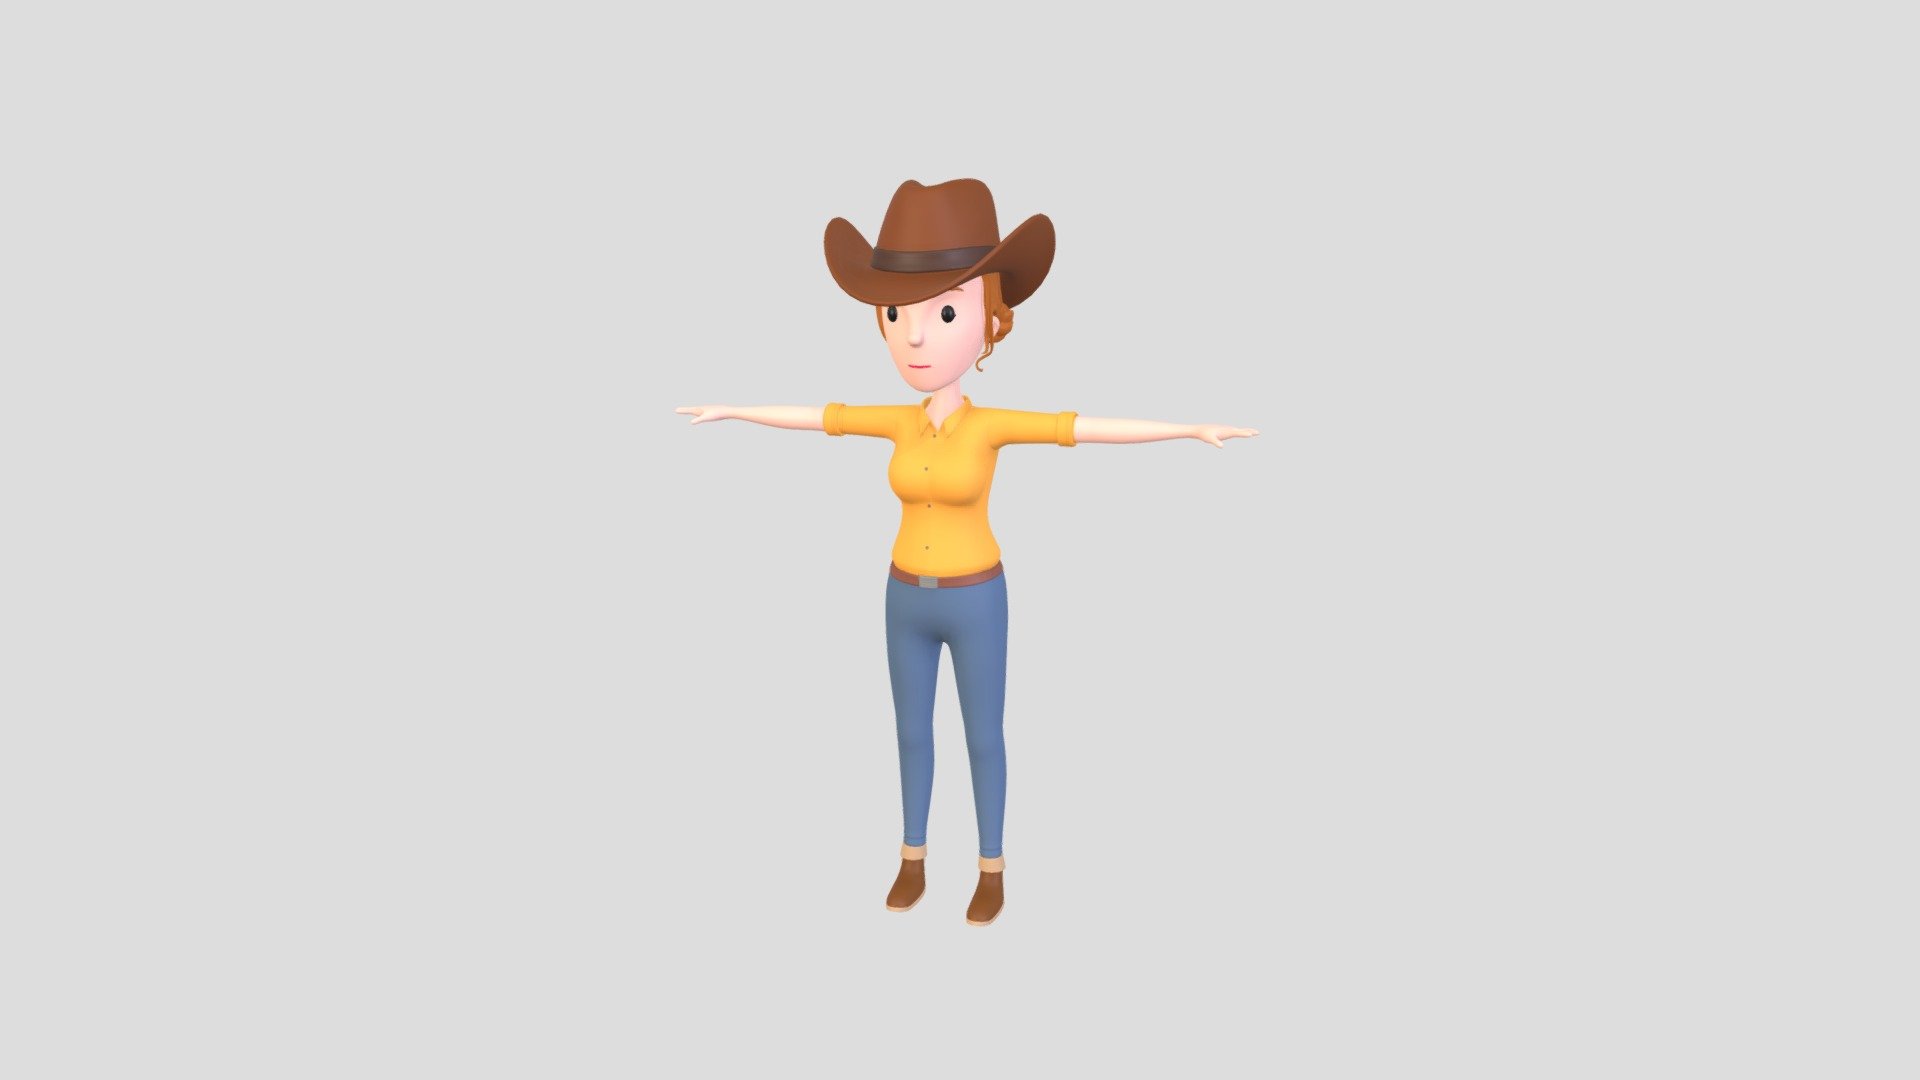 Cartoongirl035 Cow Girl Buy Royalty Free 3d Model By Bariacg [4c7e4d3